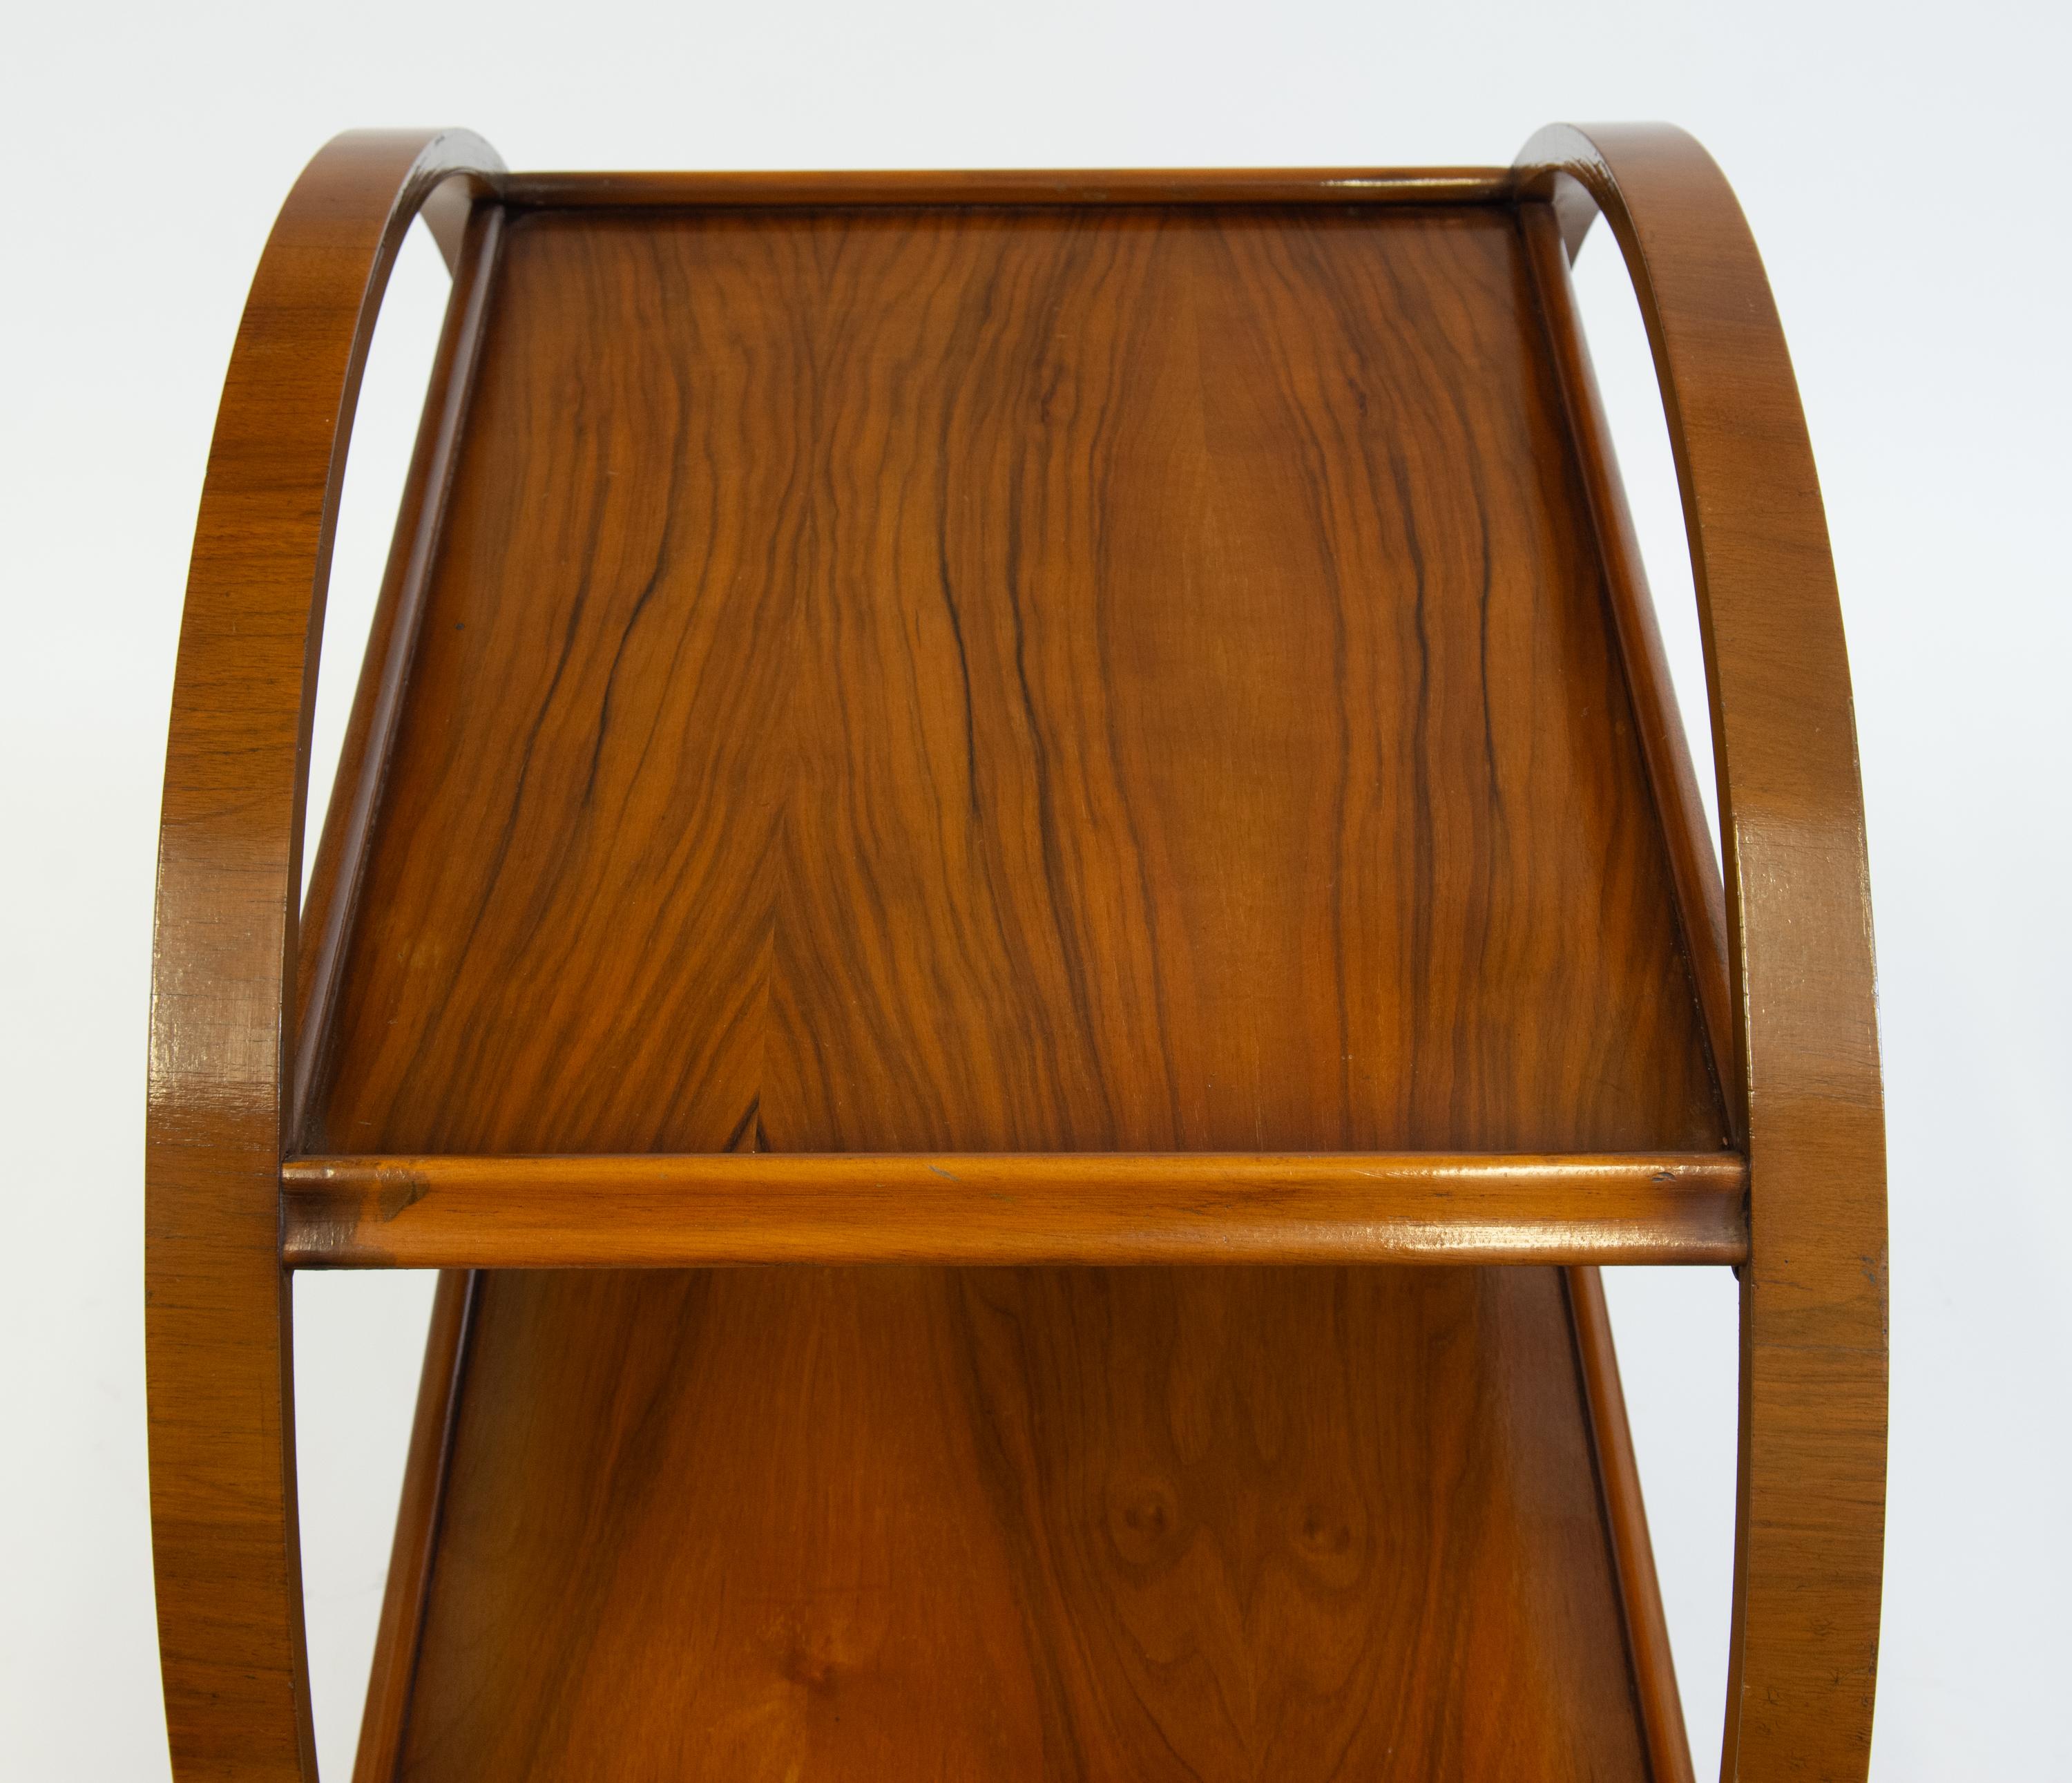 1930s English Art Deco Walnut Round Drinks Cocktail Trolley Modernist Bar Cart For Sale 1